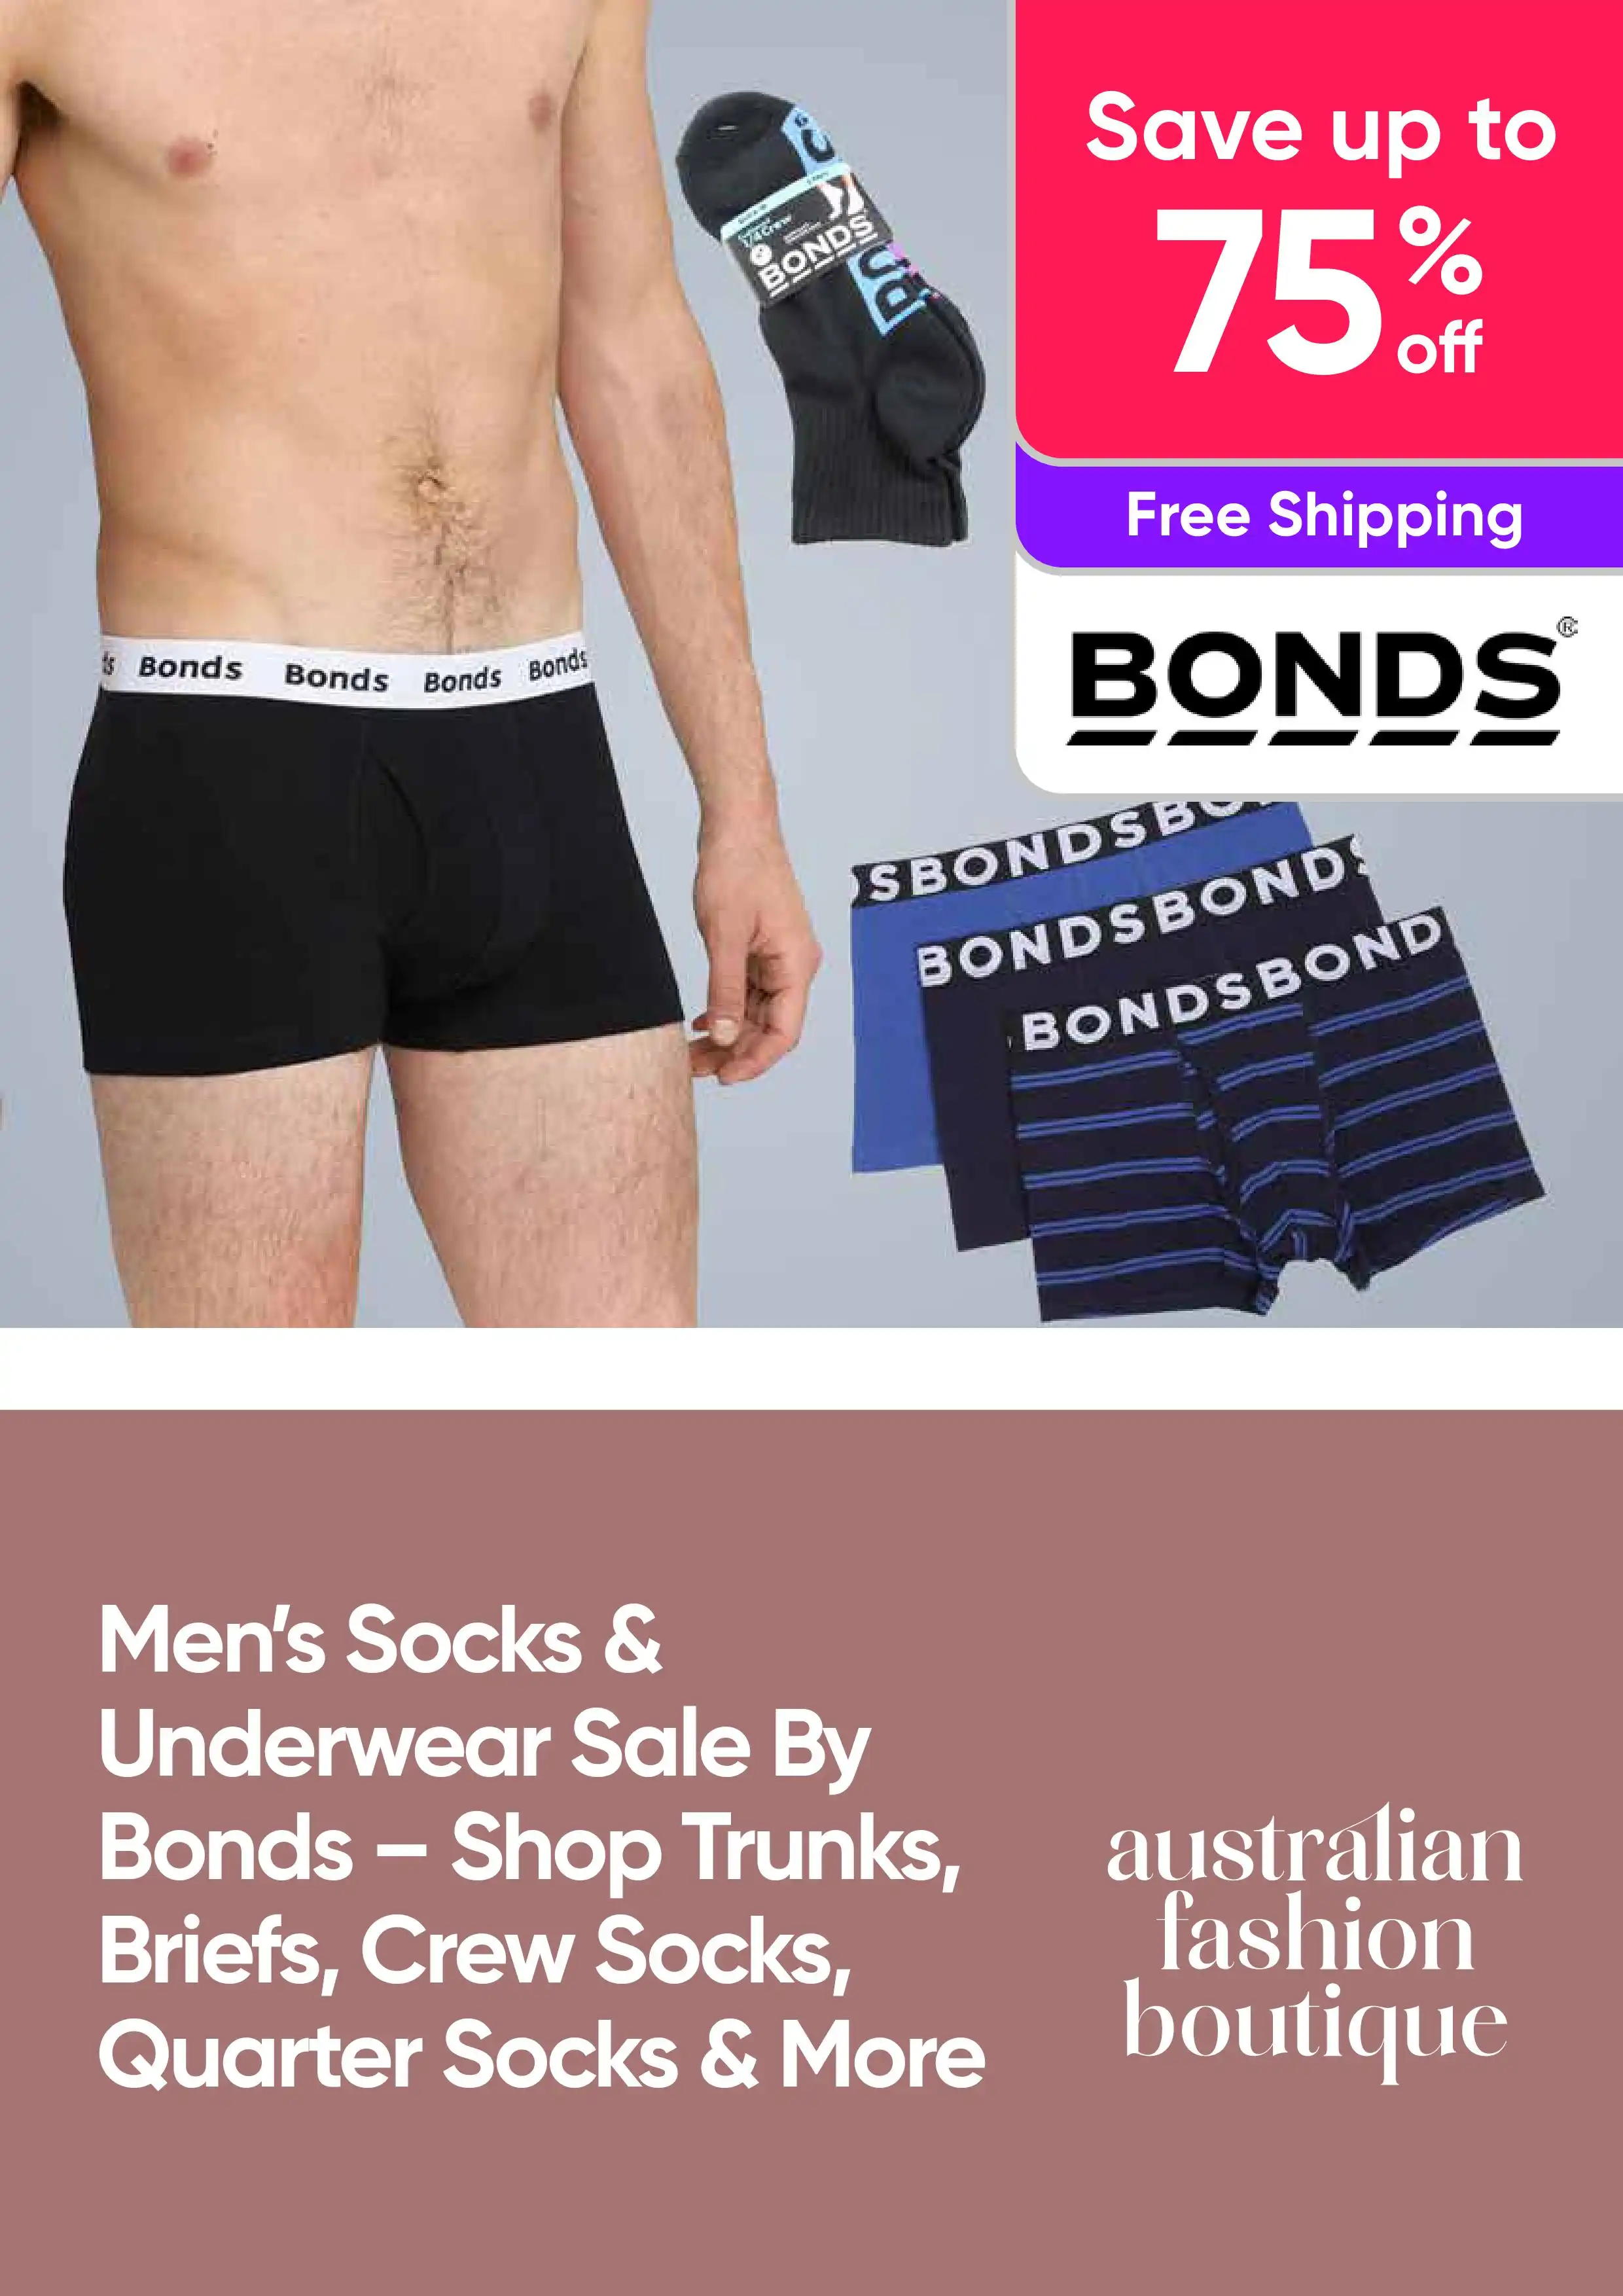 One MENS BONDS FLY-FRONT TRUNKS UNDIES SHORTS BOXERS BRIEFS SIZE S